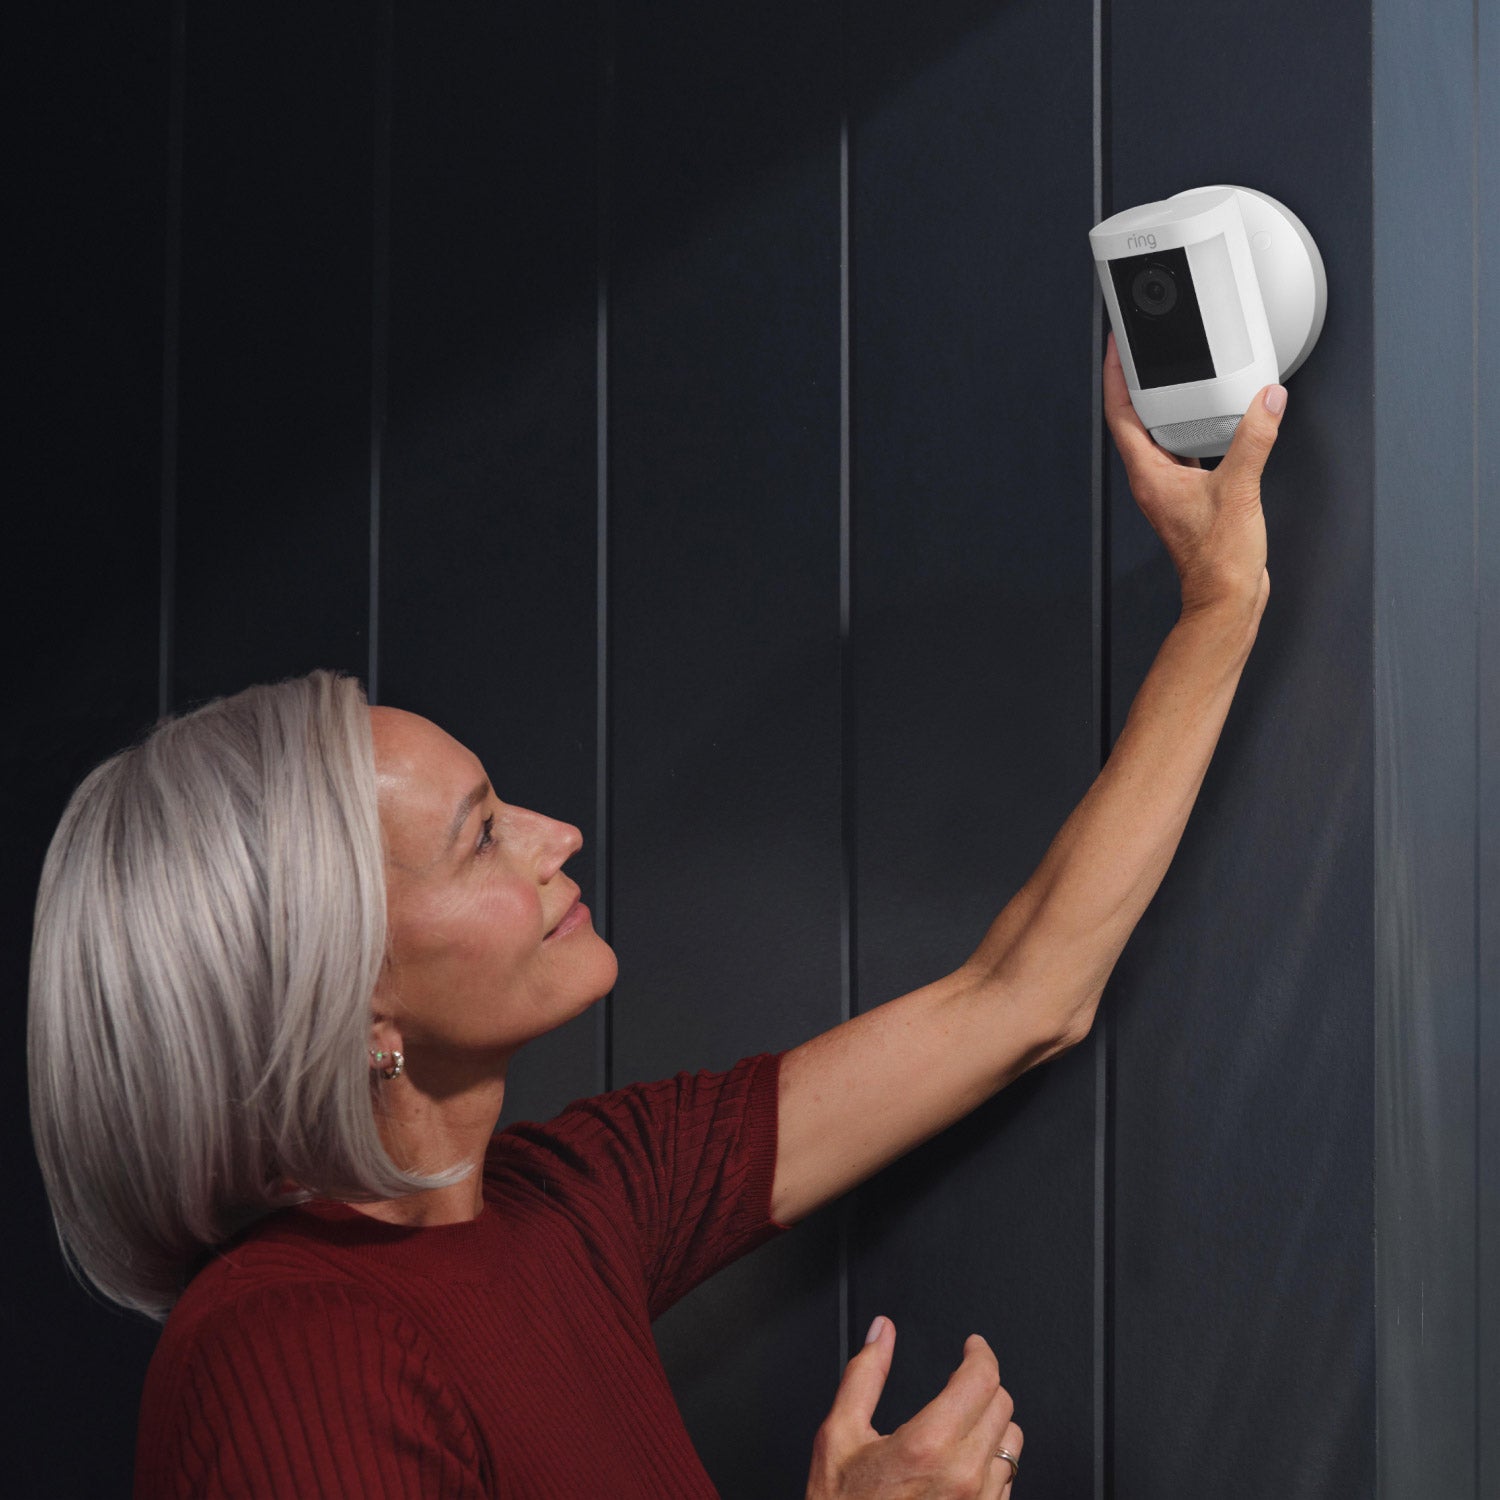 Spotlight Cam Pro (Wired) - Woman reaching up to adjust angle of Spotlight Cam Pro, Wired model, mounted on an exterior wall of home.